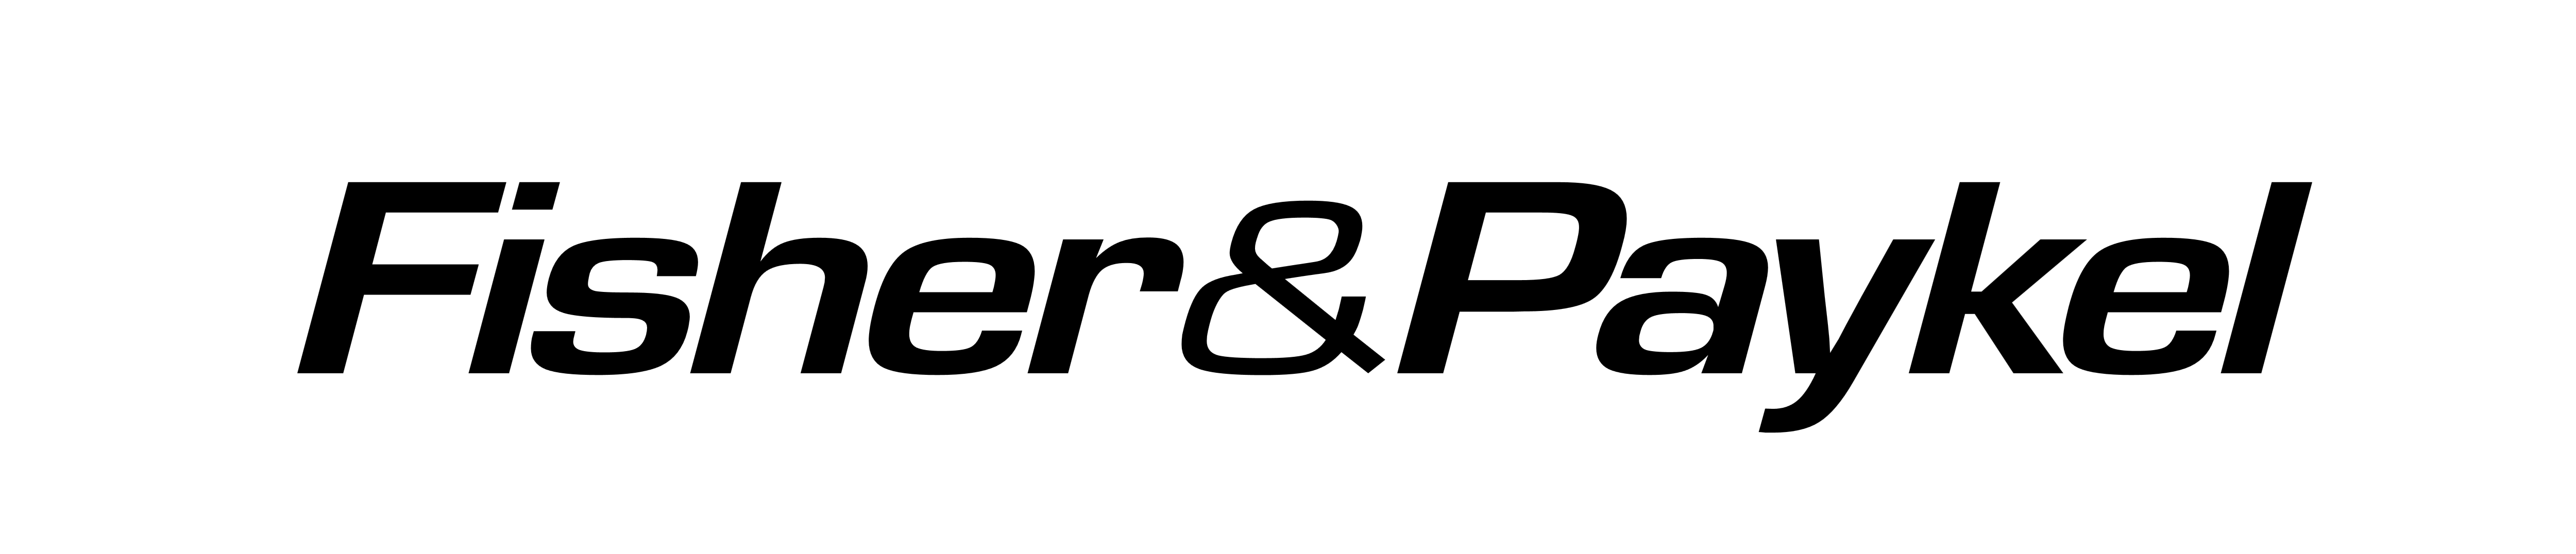 Fisher_and_Paykel_logo